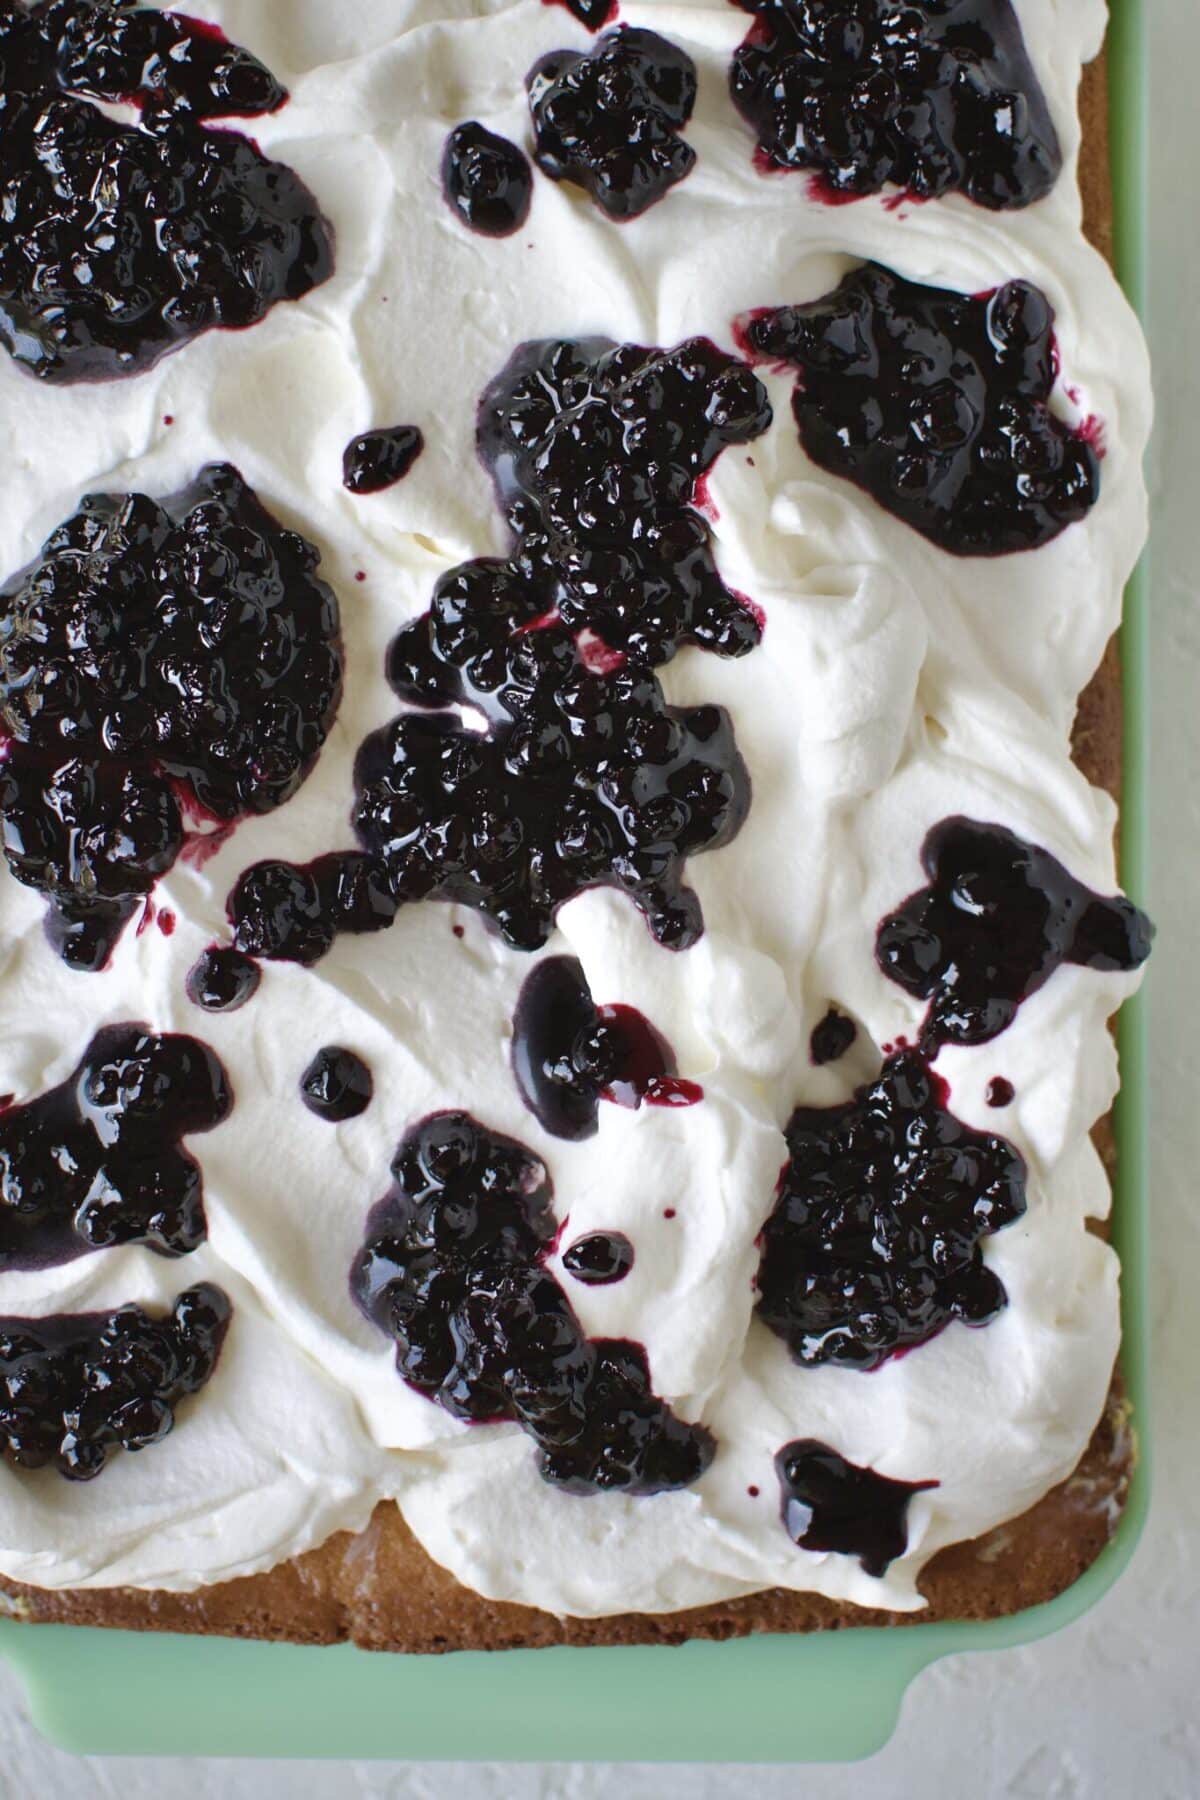 dropping dollops of blueberry jam on top of the whipped cream on the tres leches cake.